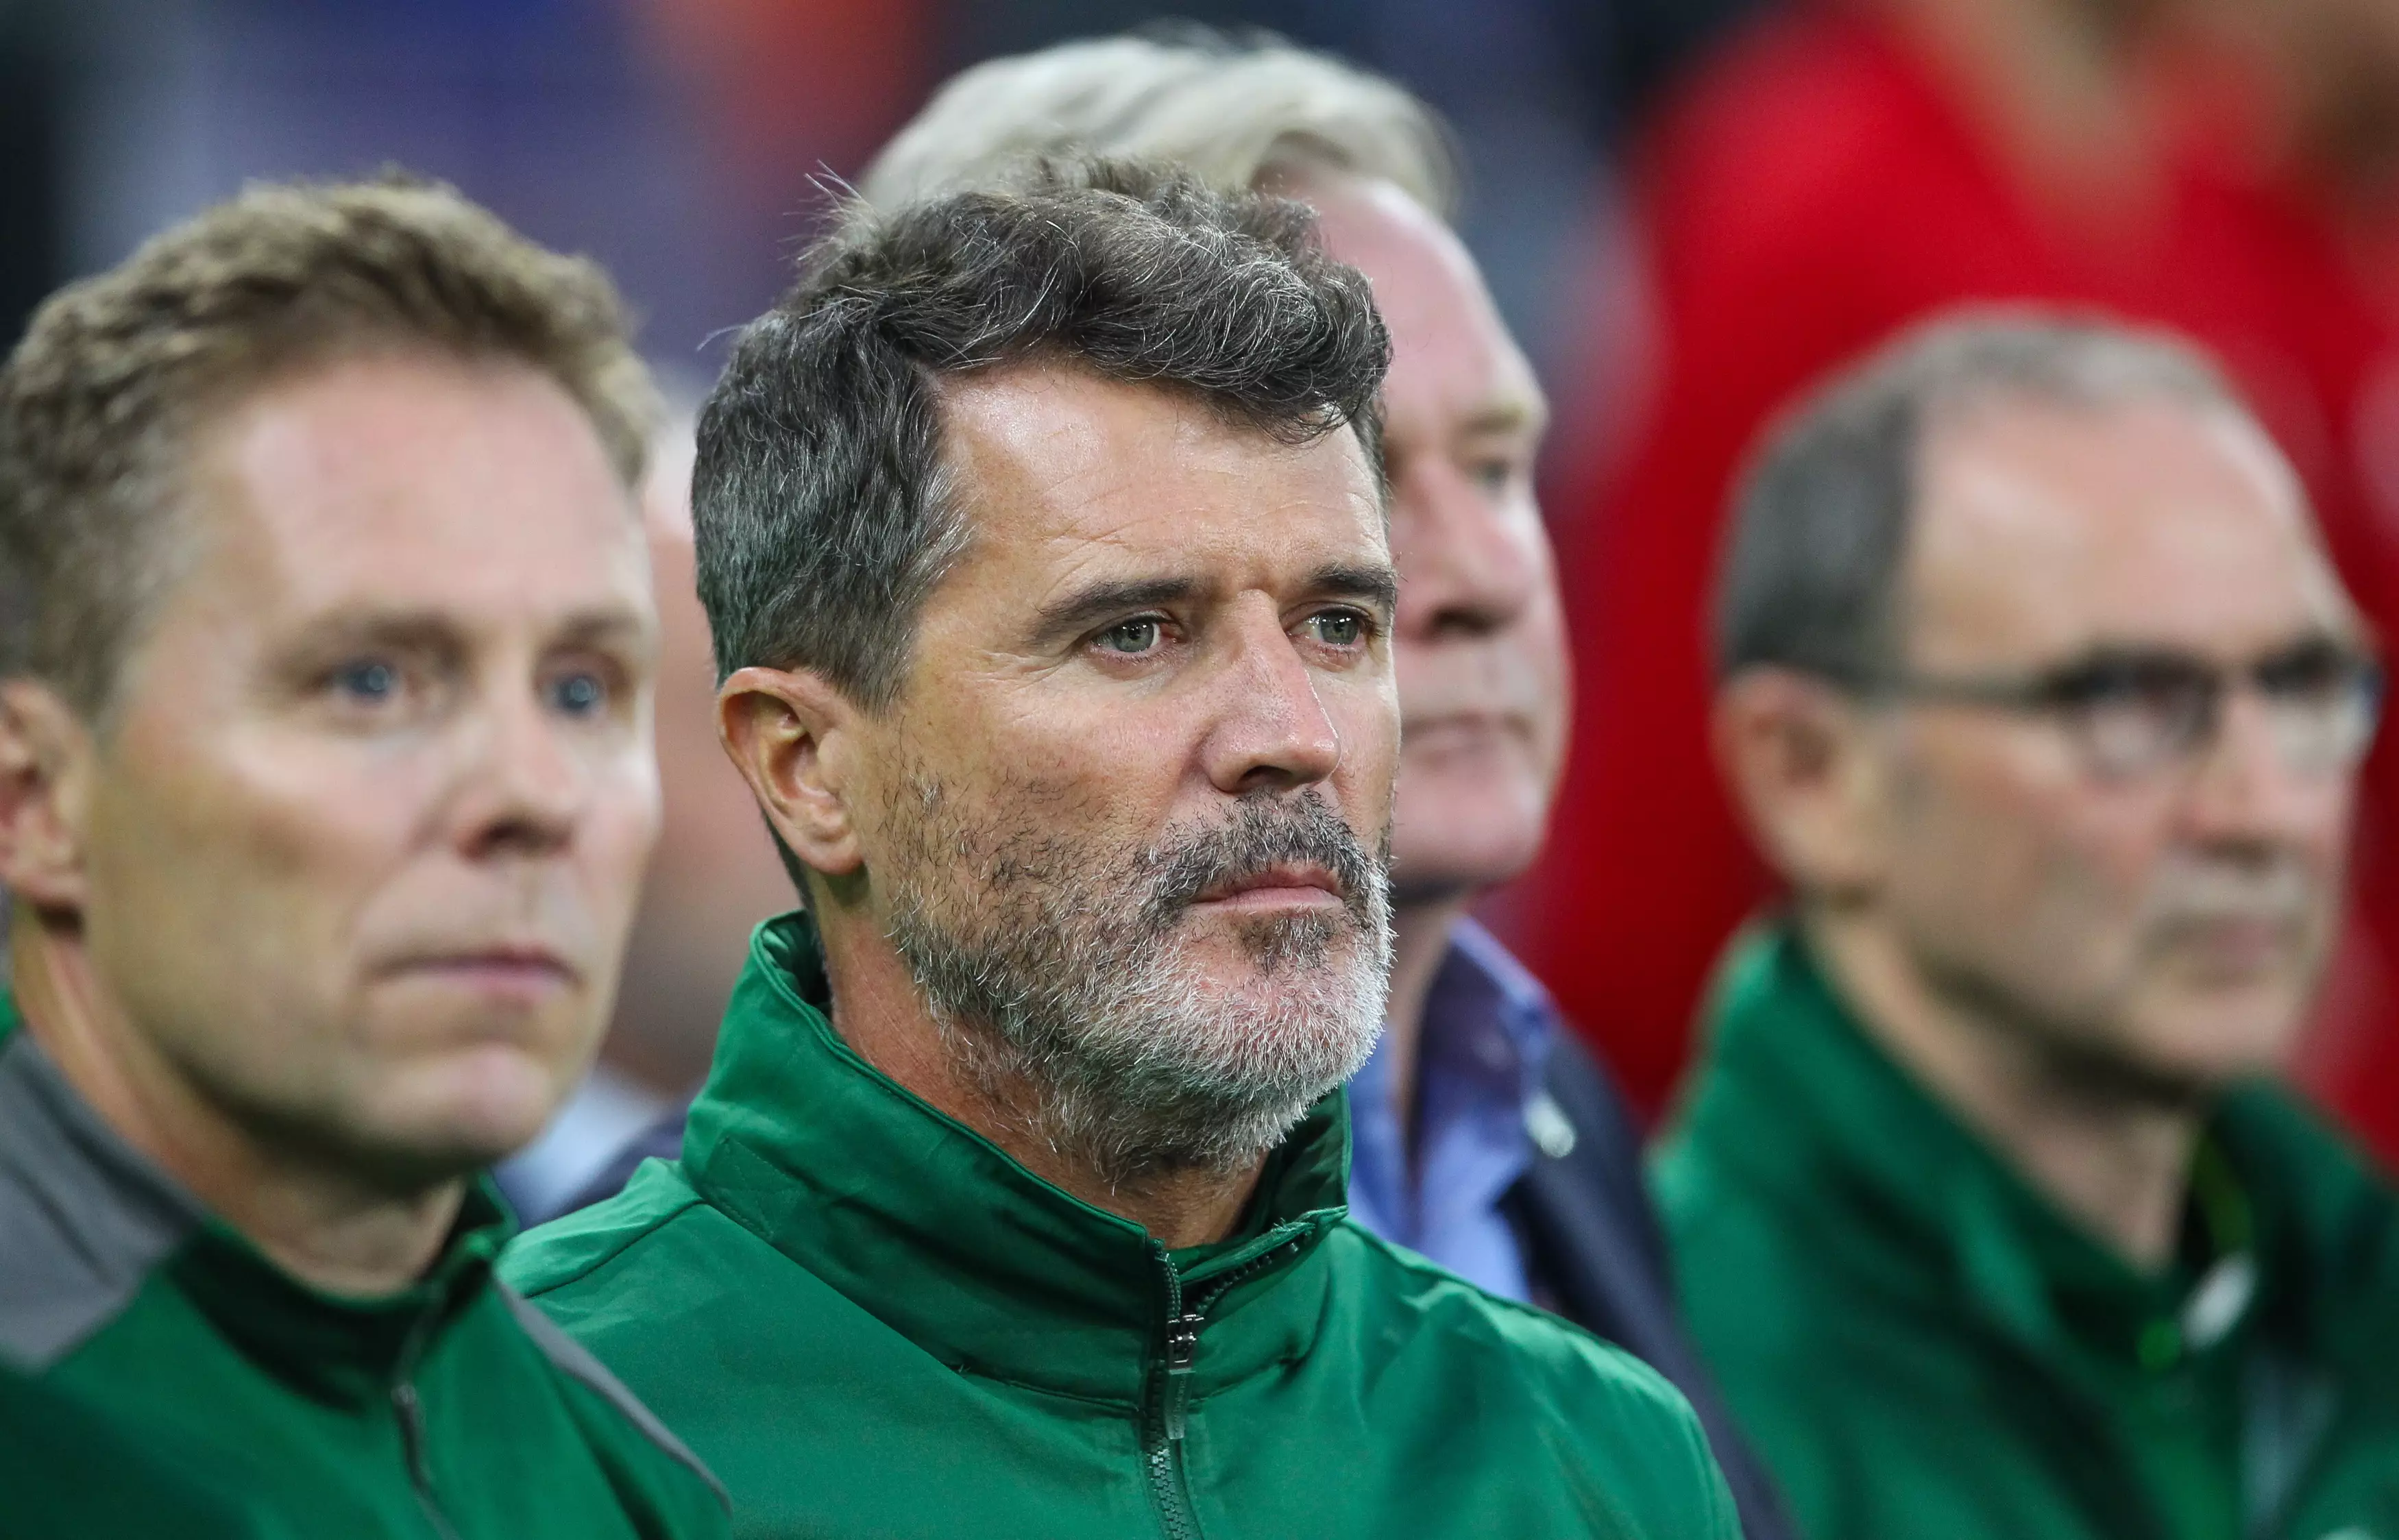 Keane ended up as assistant manager for his country. Image: PA Images